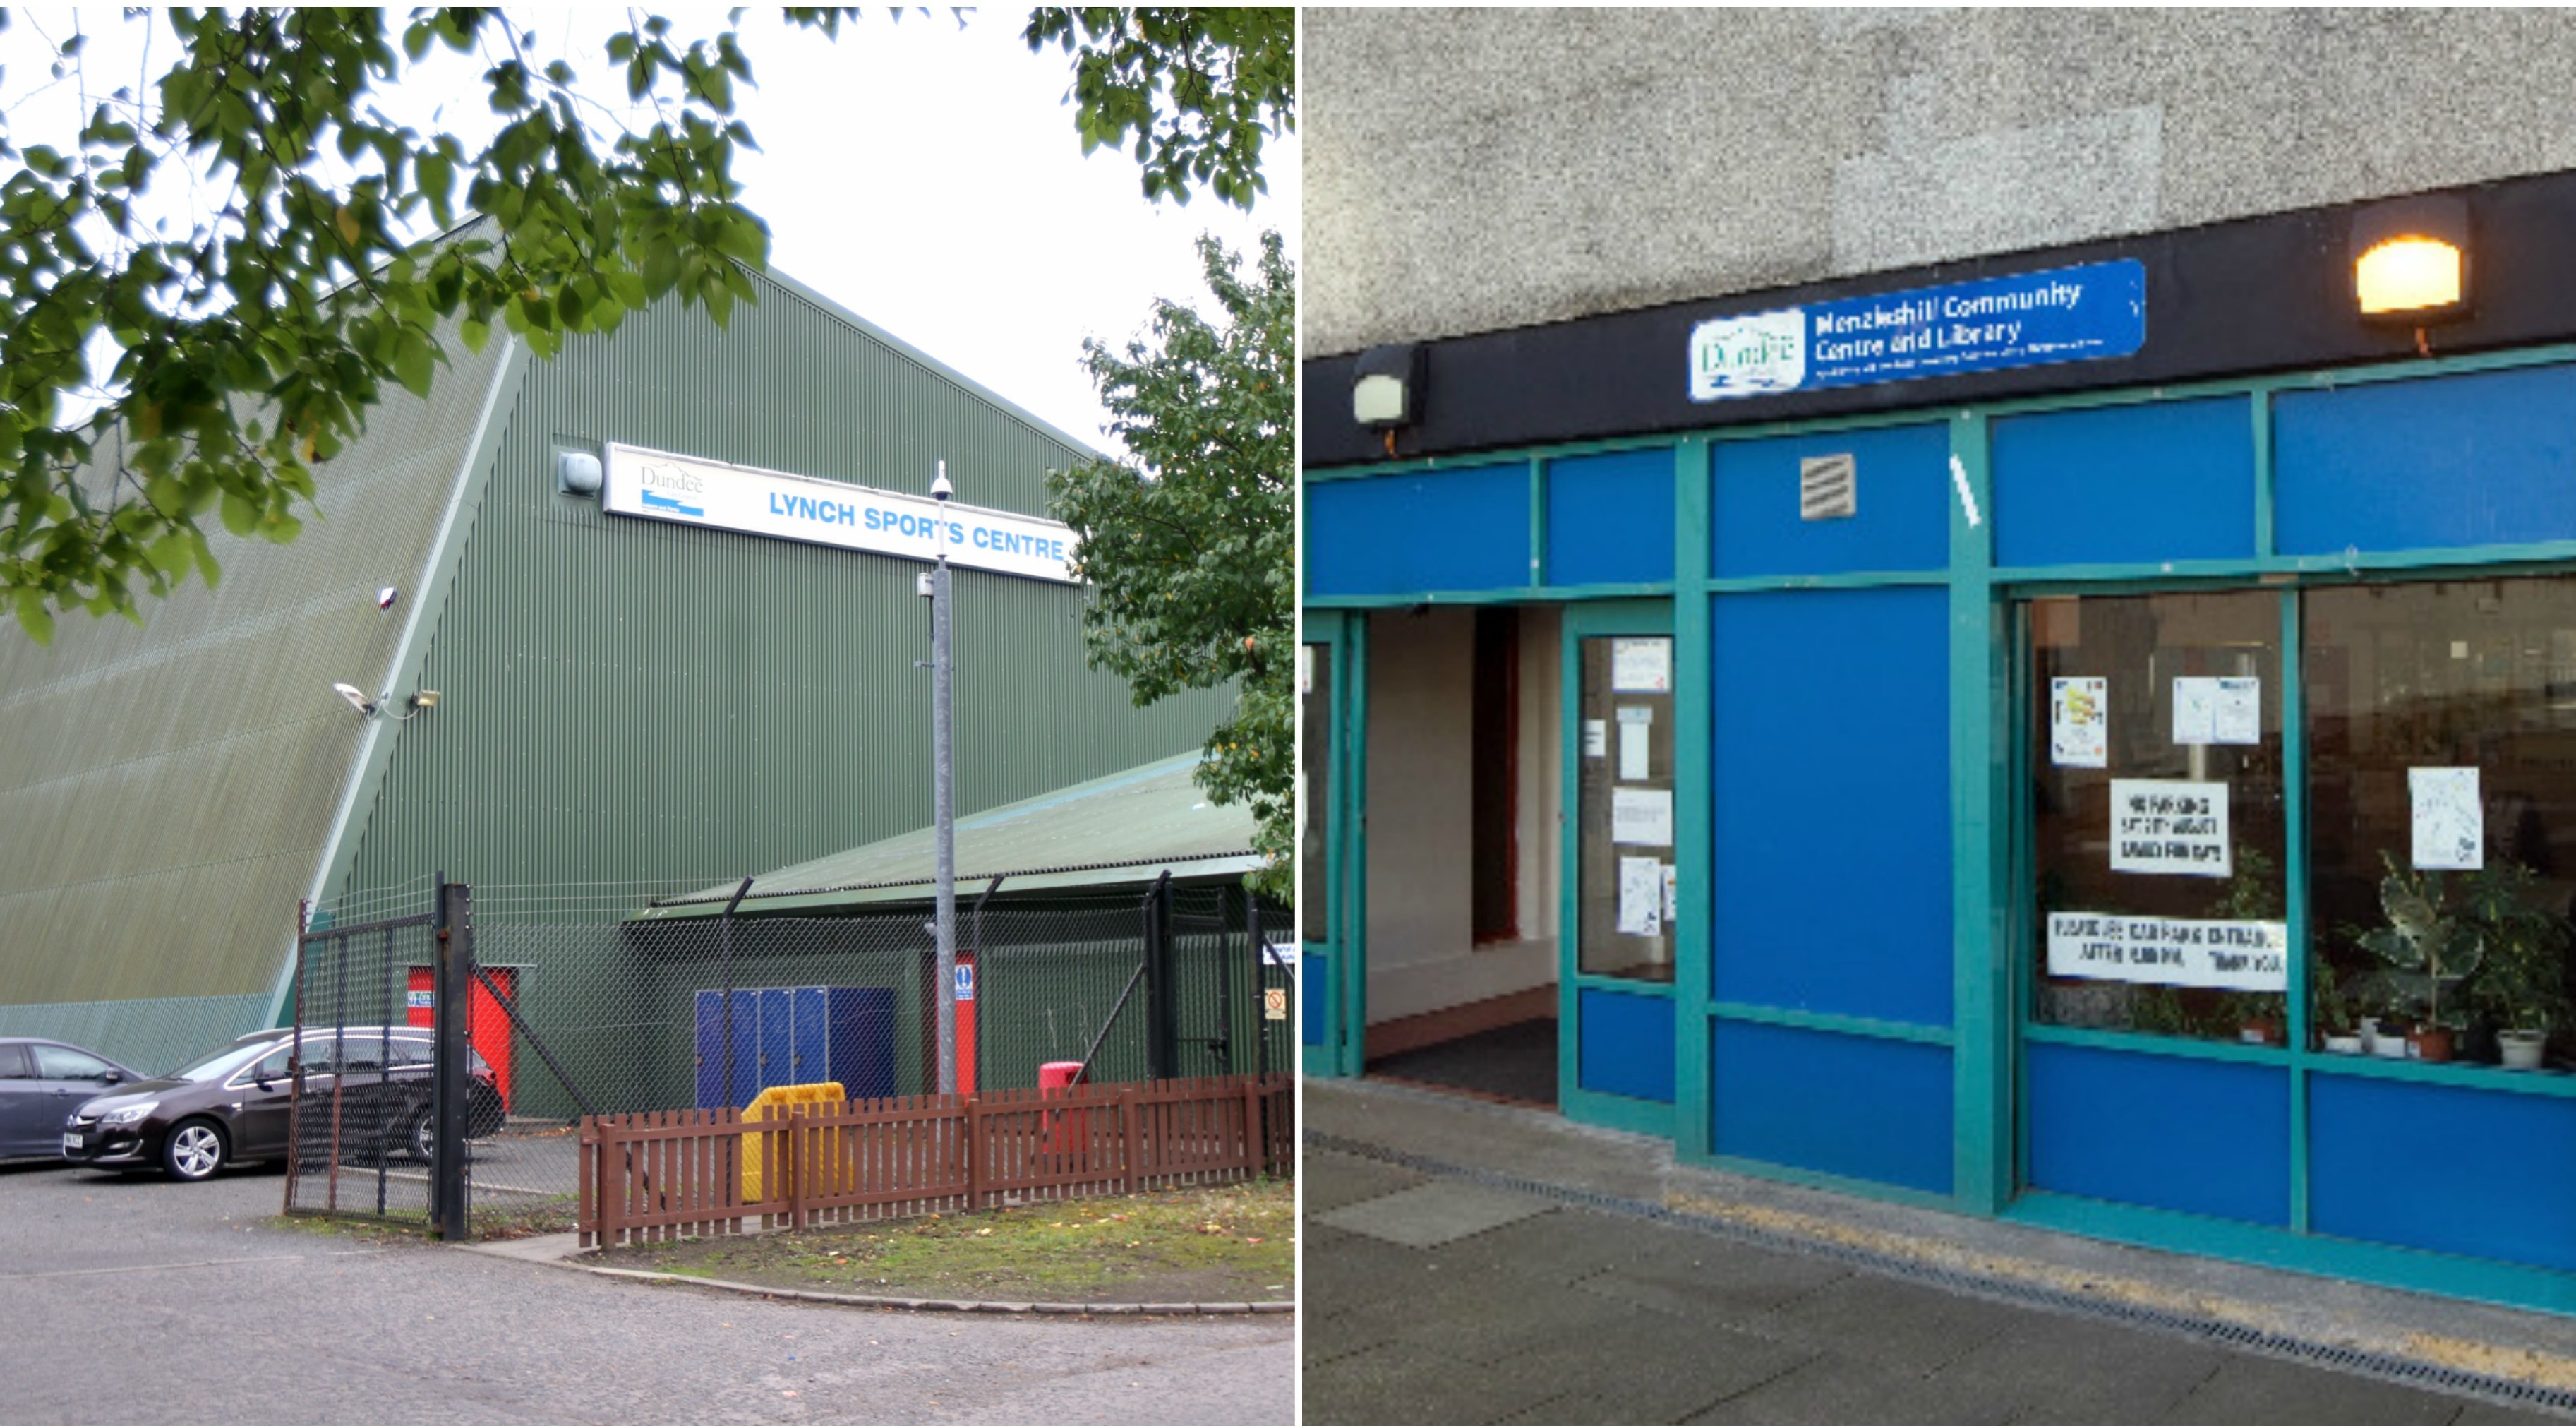 Lynch Sports Centre and Menzieshill Community Centre